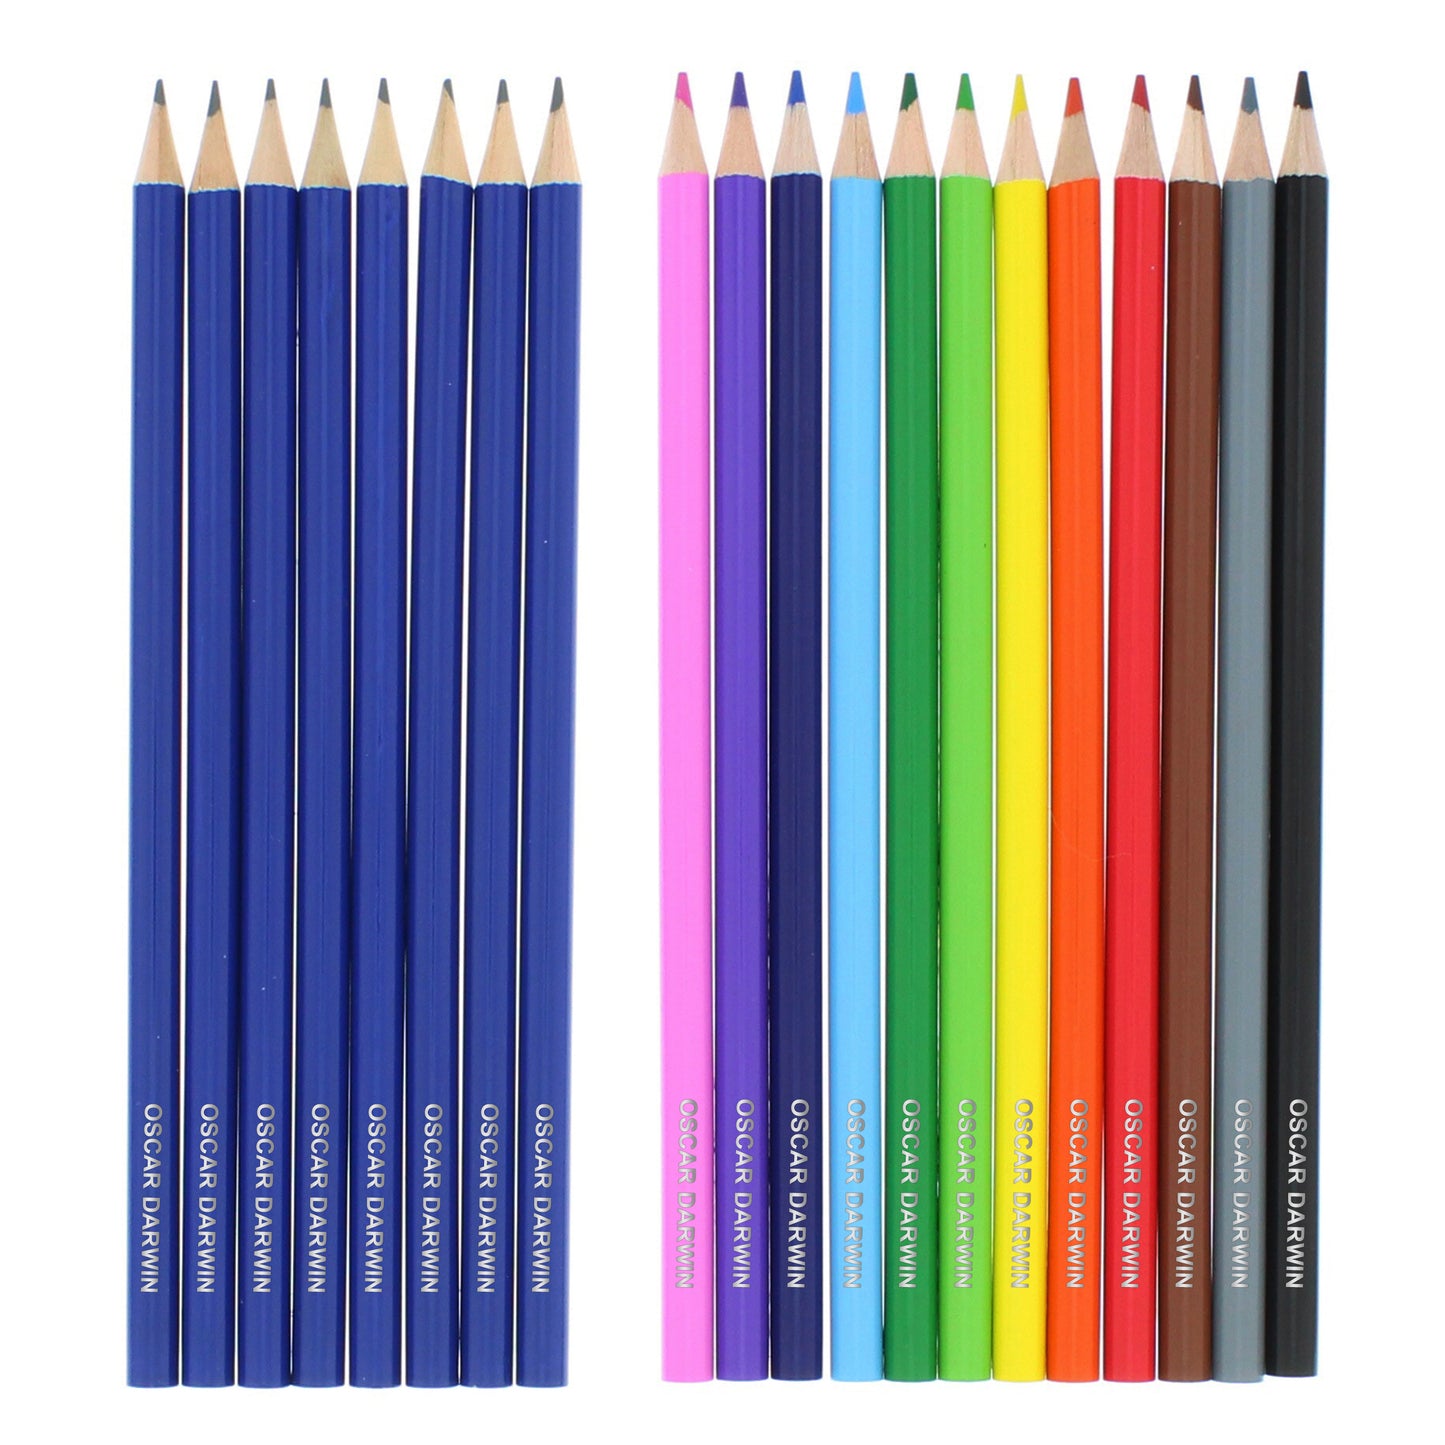 Pack of 20 HB pencils & colouring pencils - Lilybet loves